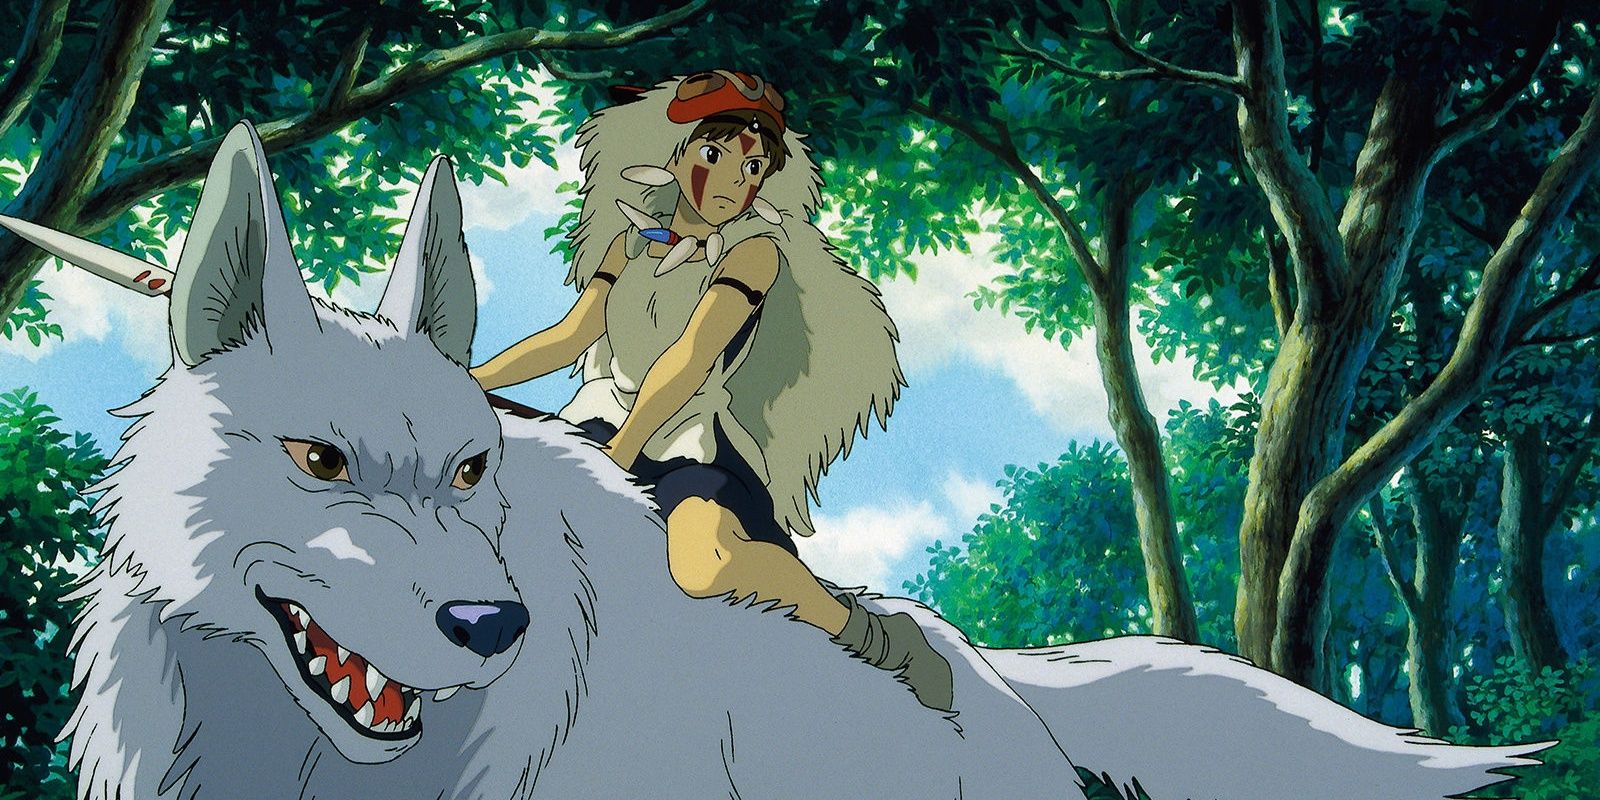 The Collected Works Of Hayao Miyazaki Every Film In The Box Set Ranked